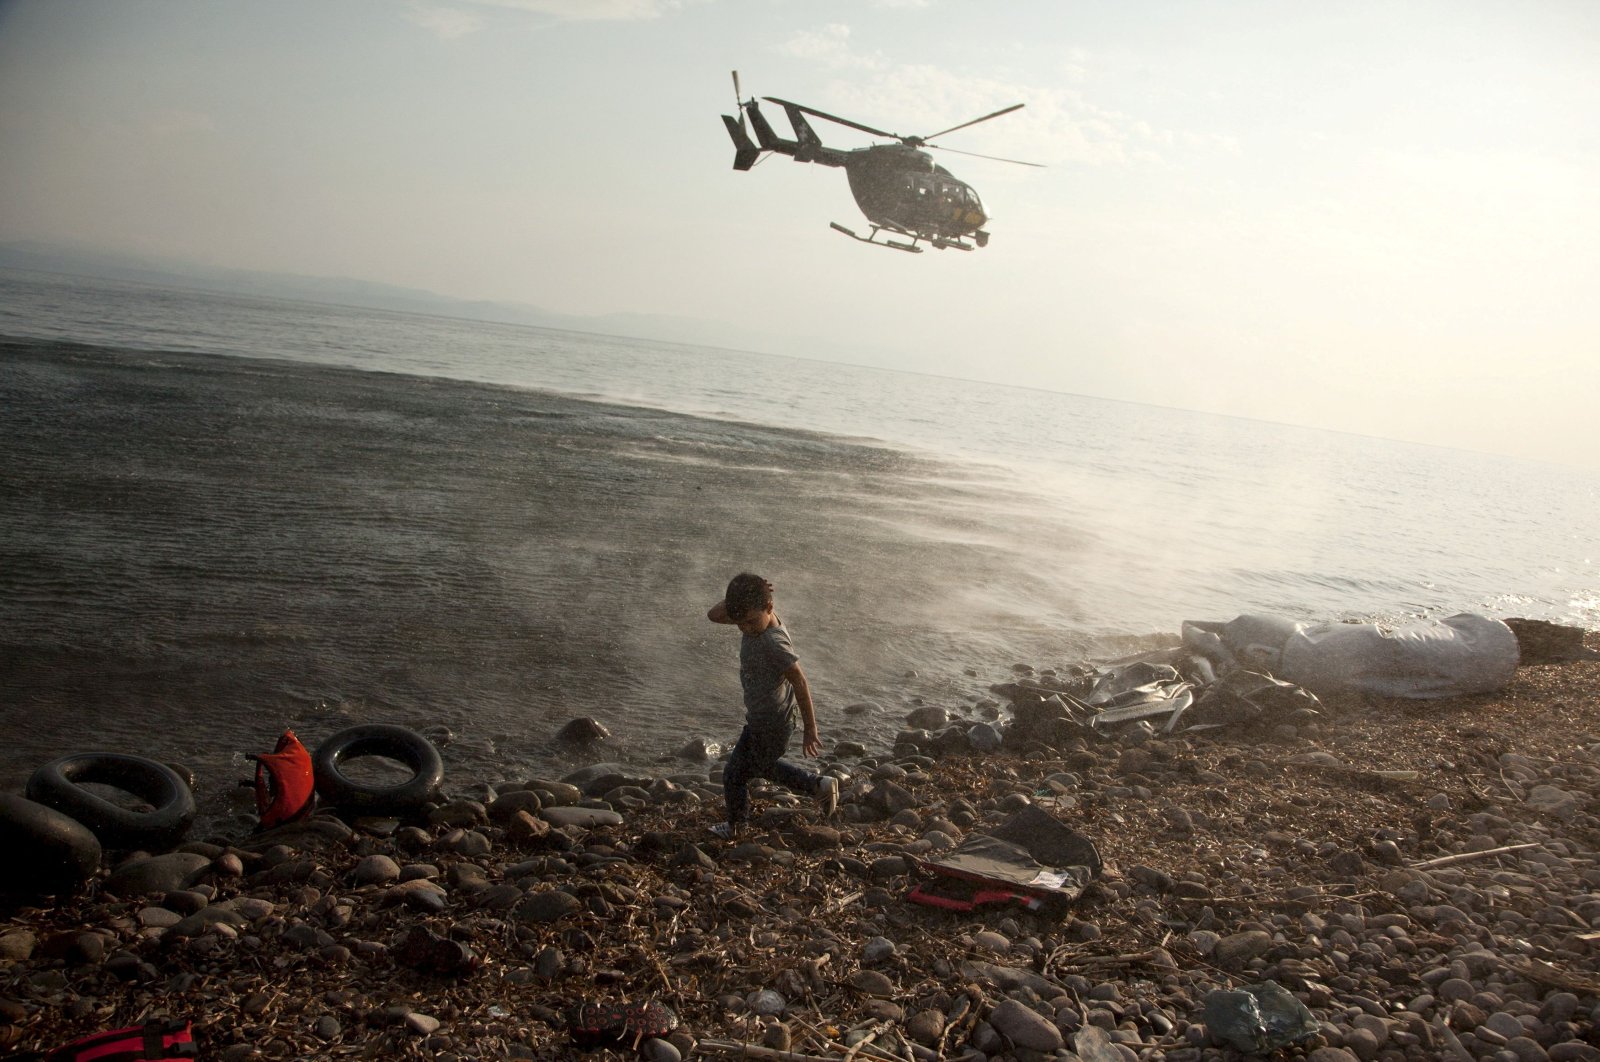 A Frontex helicopter patrols over a Syrian child that has just arrived at a beach on the Aegean island of Lesbos, Greece, Aug. 10, 2015. (Reuters Photo)